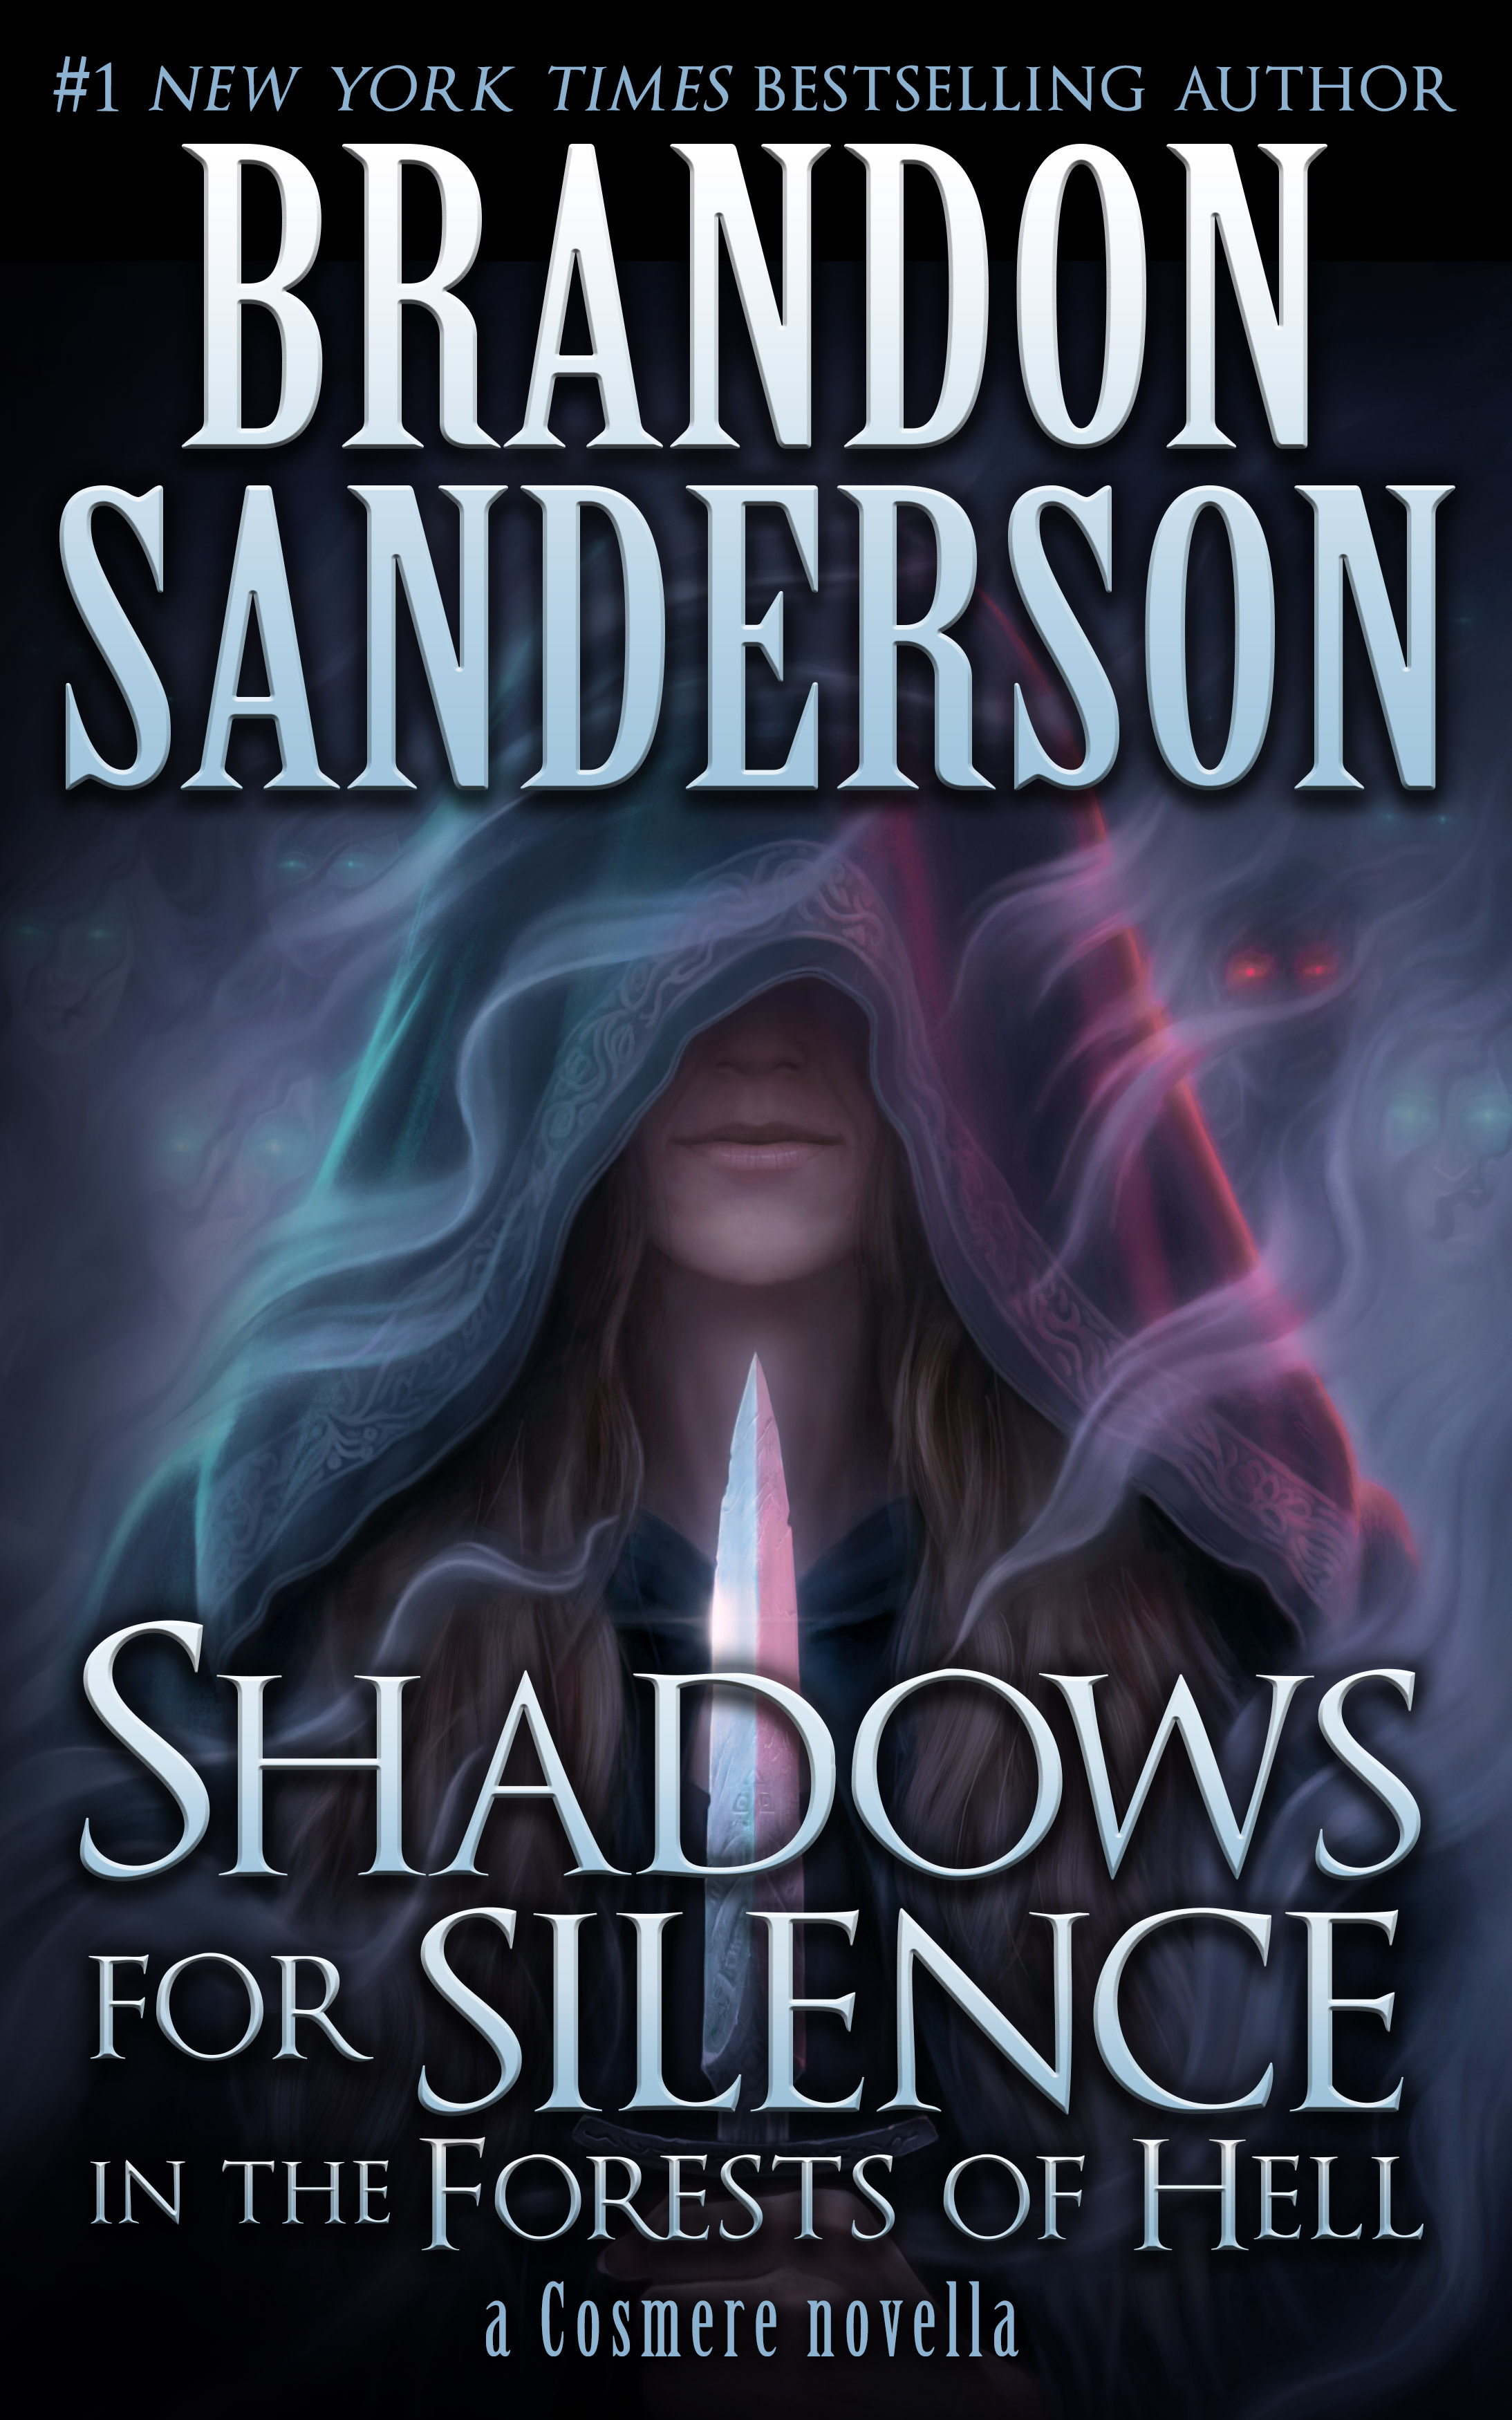 Shadows for Silence in the Forests of Hell by Brandon Sanderson